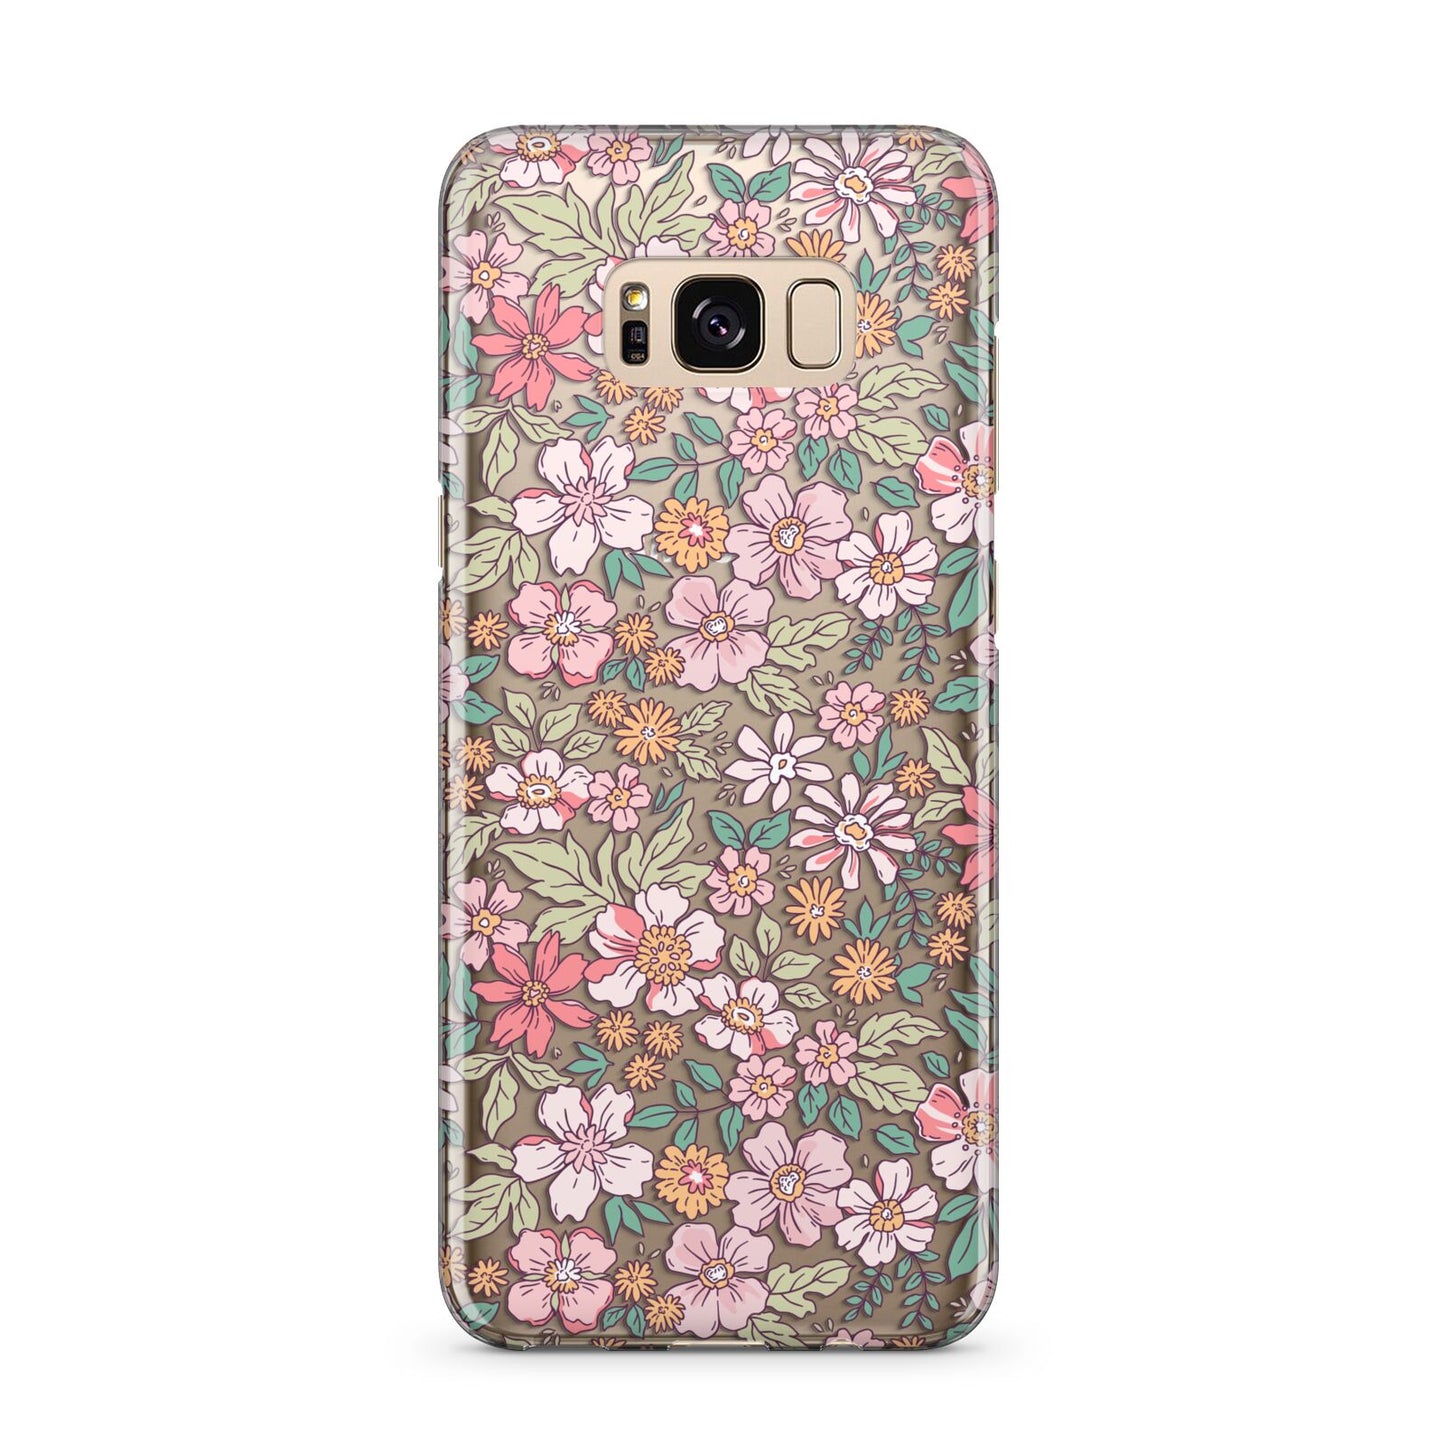 Small Floral Pattern Samsung Galaxy S8 Plus Case